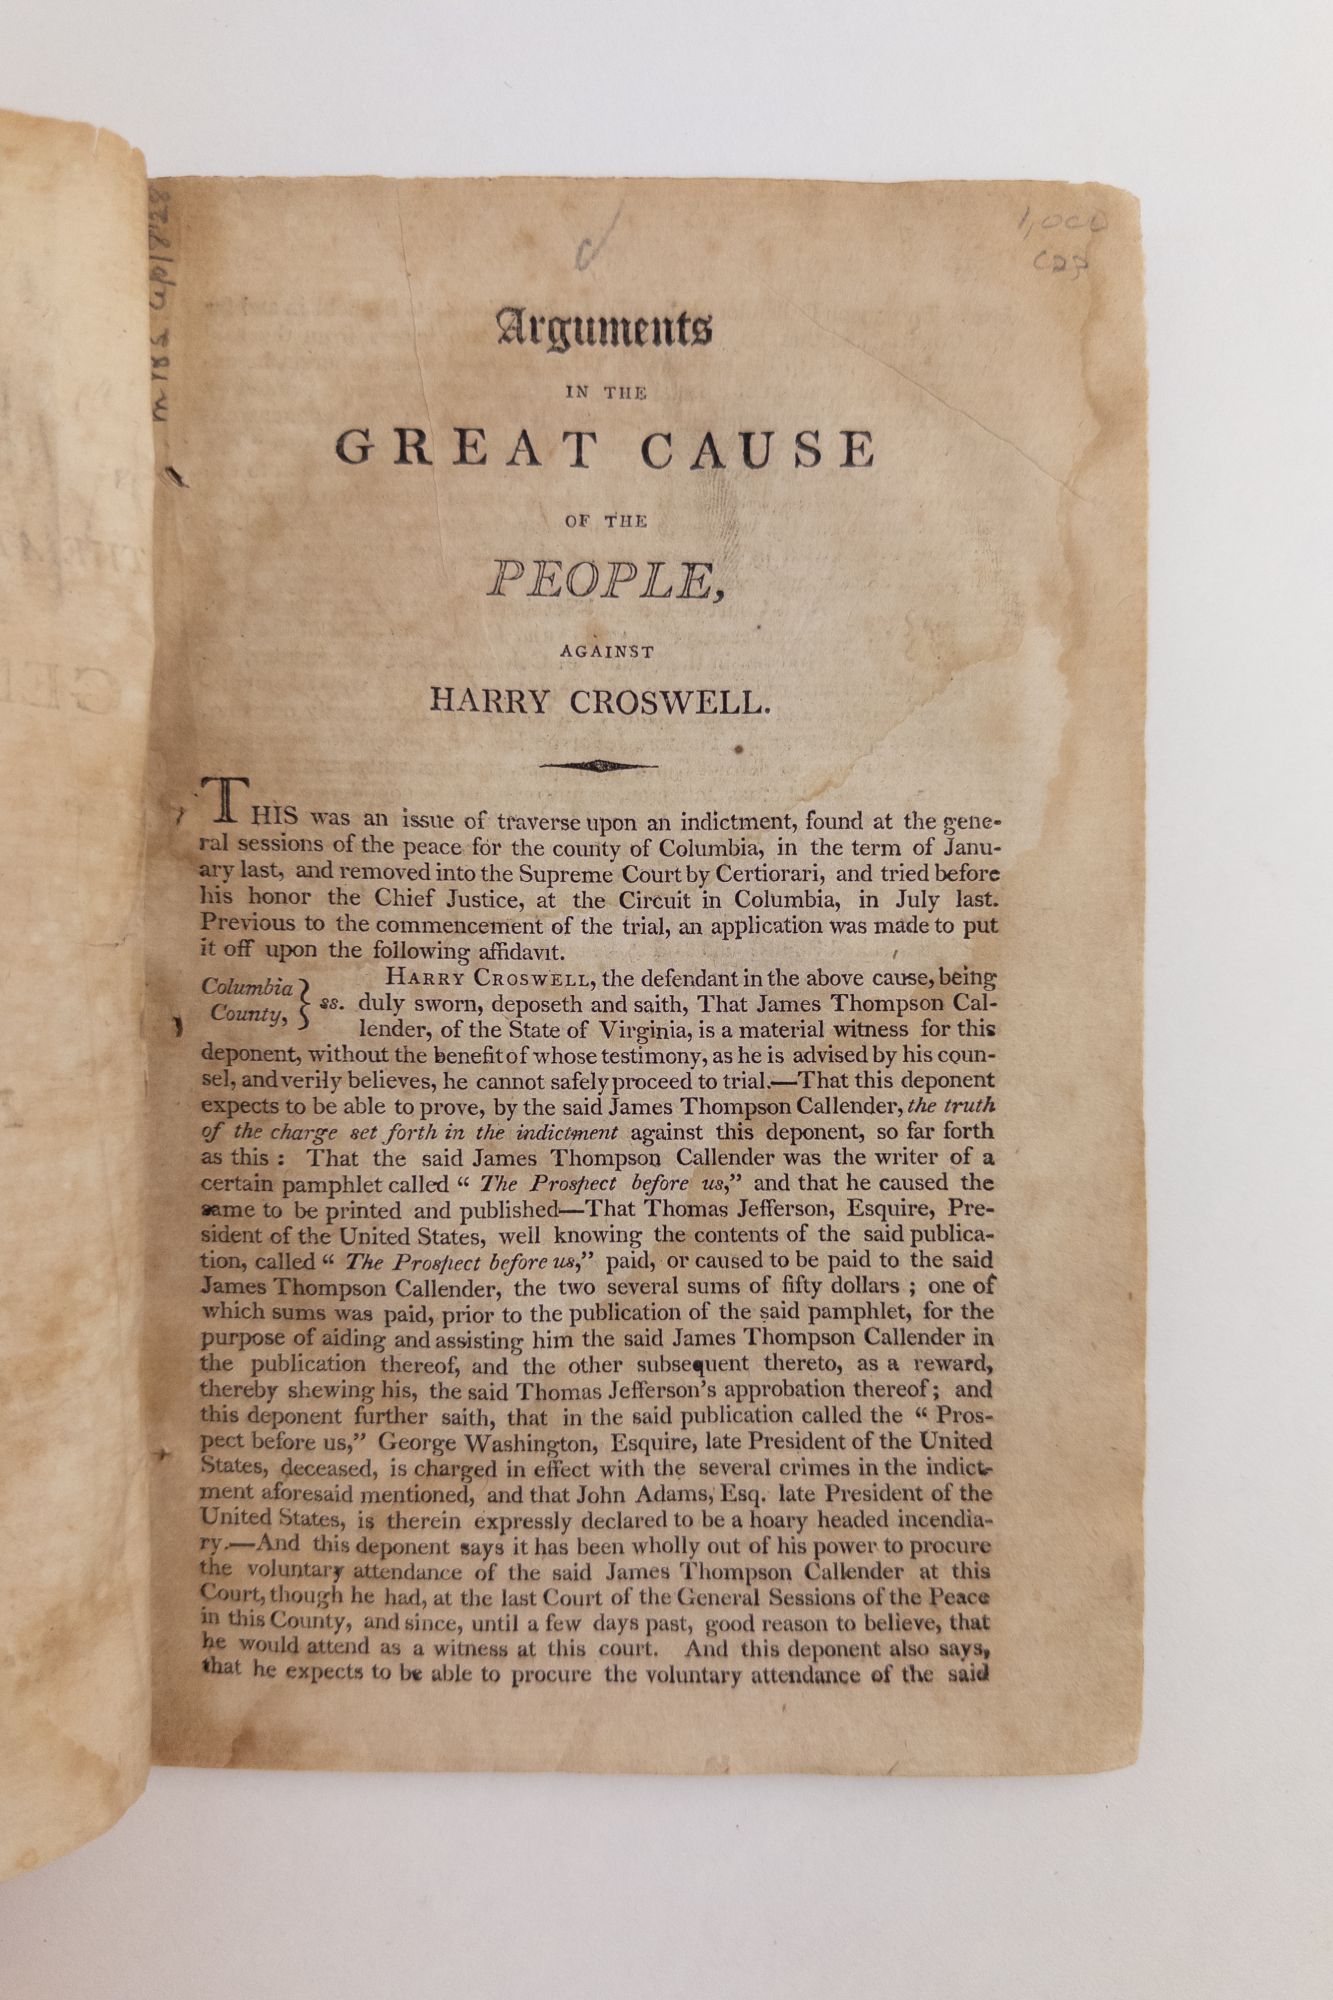 Product Image for THE SPEECHES AT FULL LENGTH OF MR. VAN NESS, MR. CAINES, THE ATTORNEY-GENERAL, MR. HARRISON, AND GENERAL HAMILTON, IN THE GREAT CAUSE OF THE PEOPLE, AGAINST HARRY CROSWELL, ON AN INDICTMENT FOR A LIBEL ON THOMAS JEFFERSON, PRESIDENT OF THE UNITED STATES